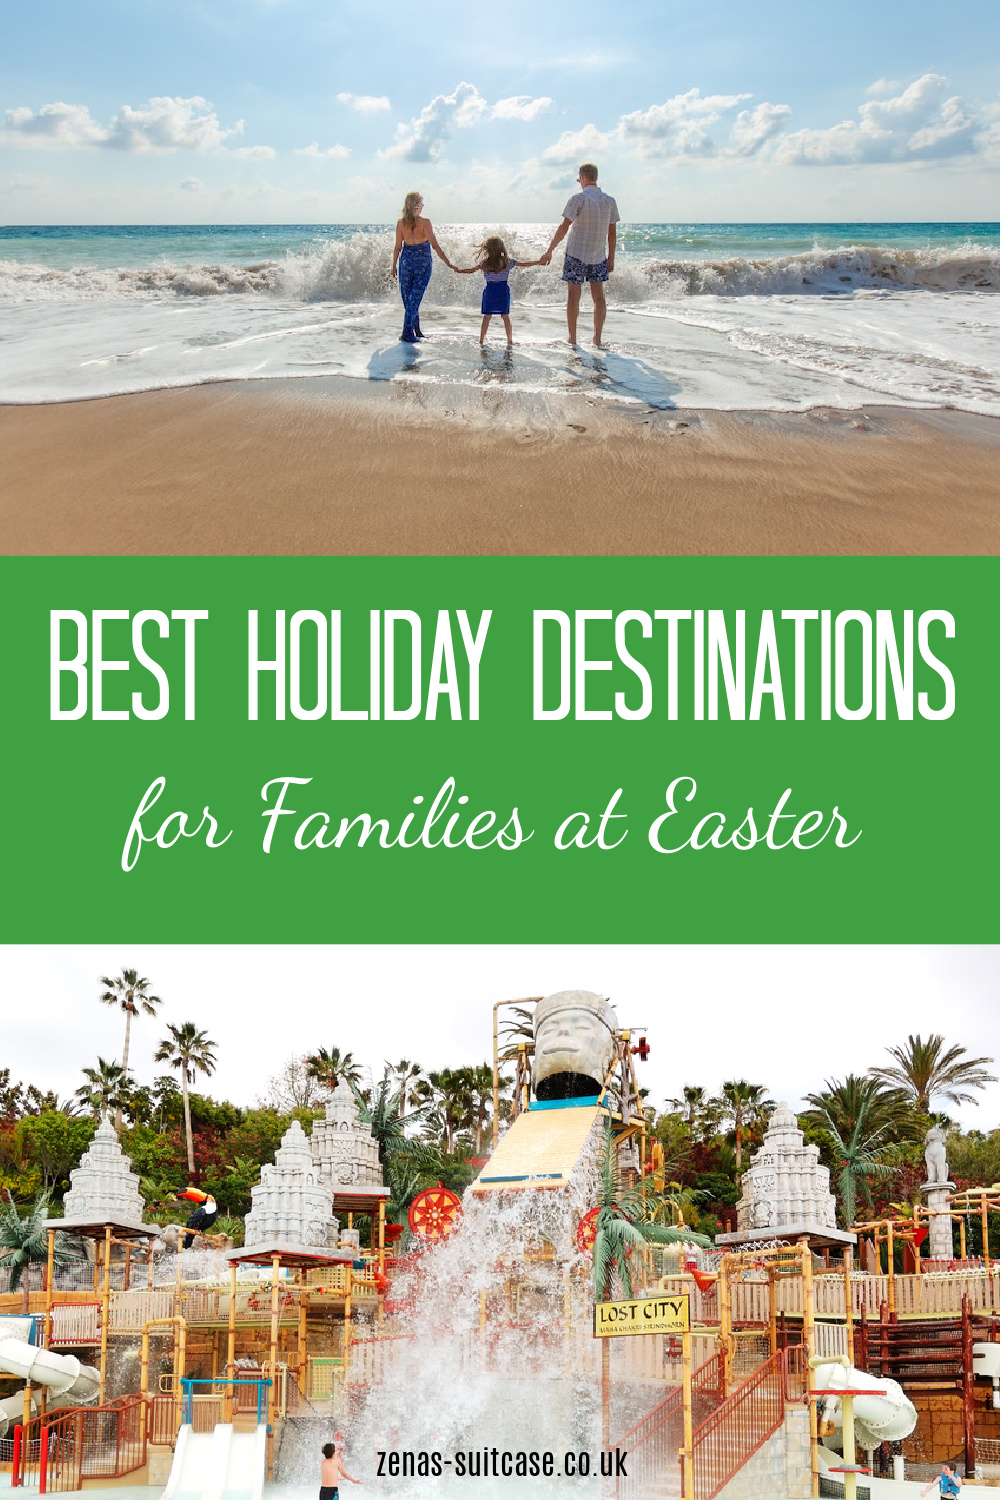 5 Best Holiday Destinations for Families at Easter